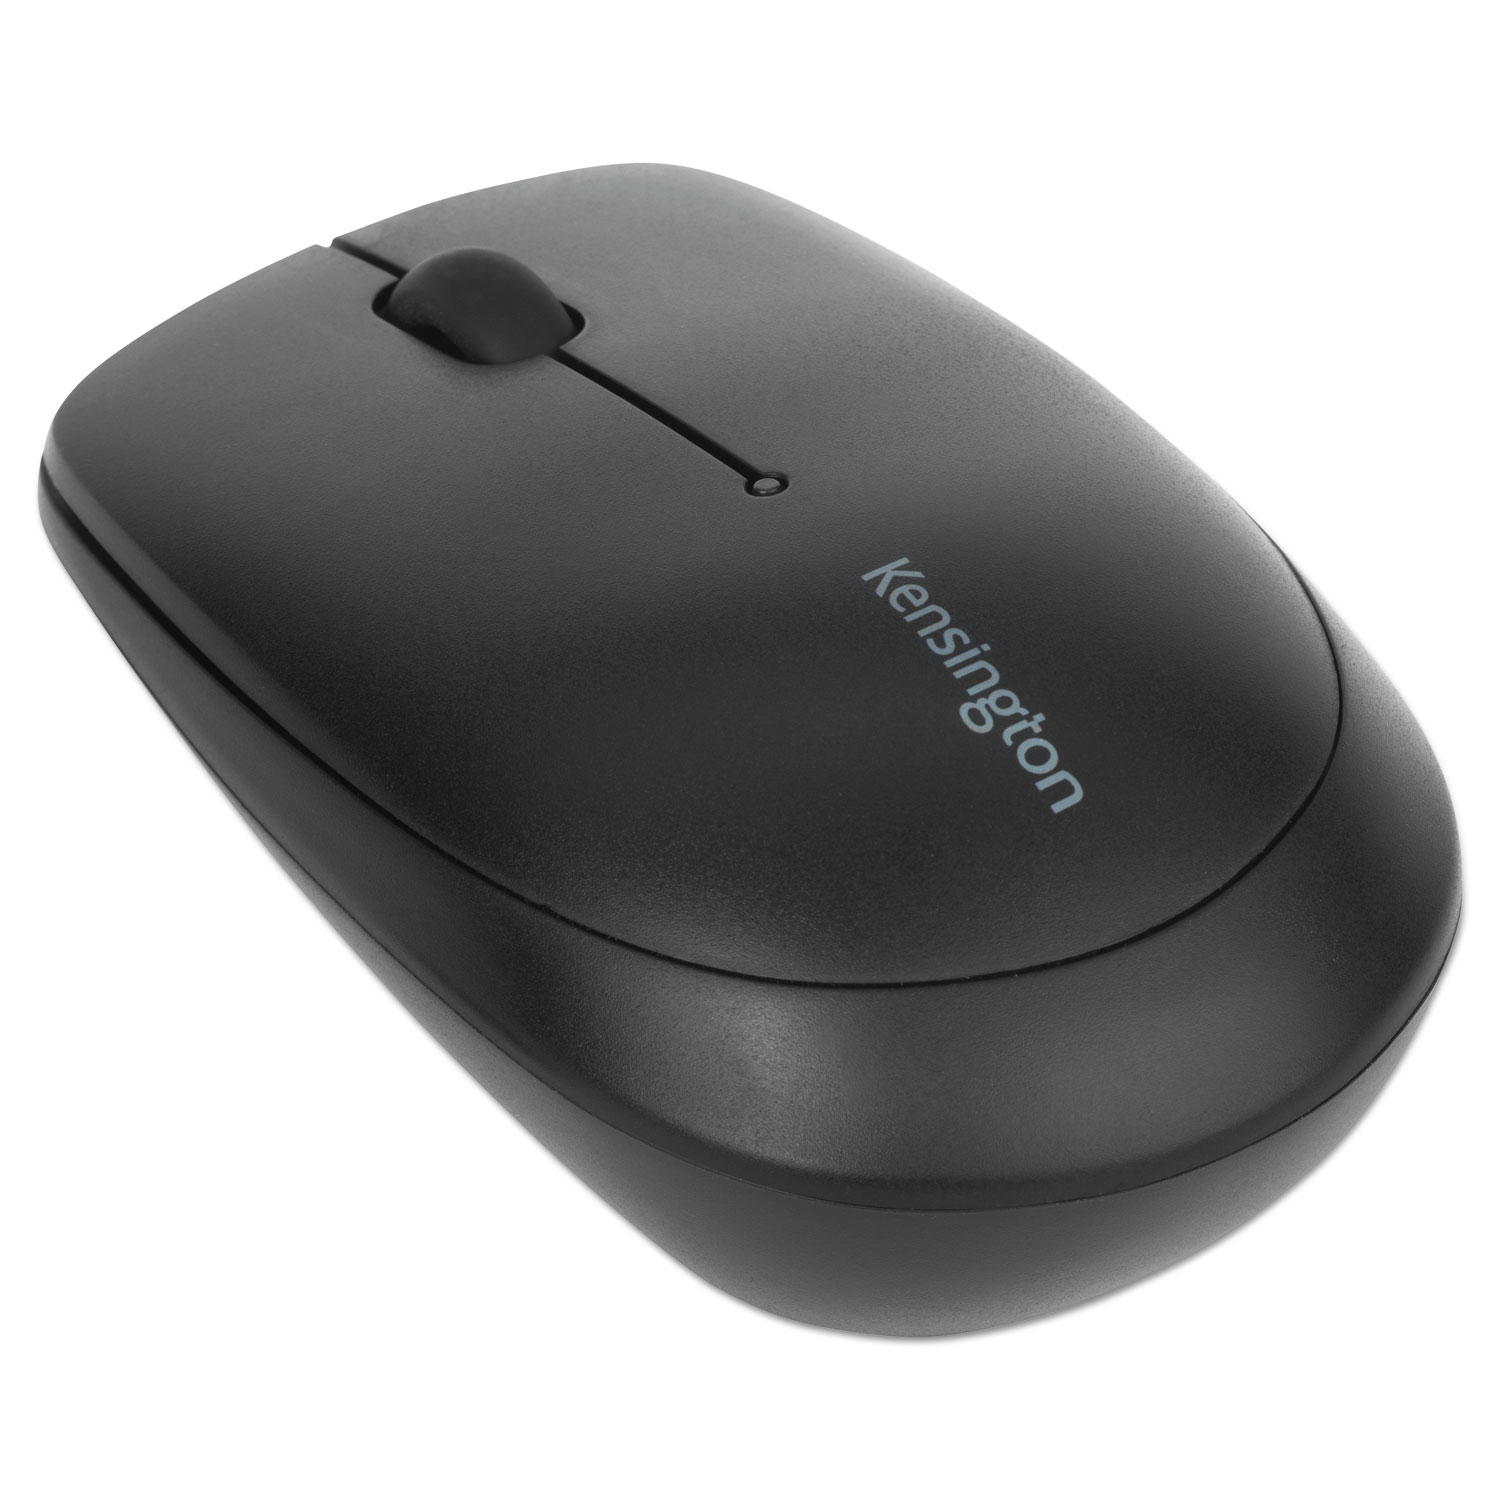  Kensington K75227WW Pro Fit Bluetooth Mobile Mouse, 2.4 GHz Frequency/26.2 ft Wireless Range, Left/Right Hand Use, Black (KMW75227) 